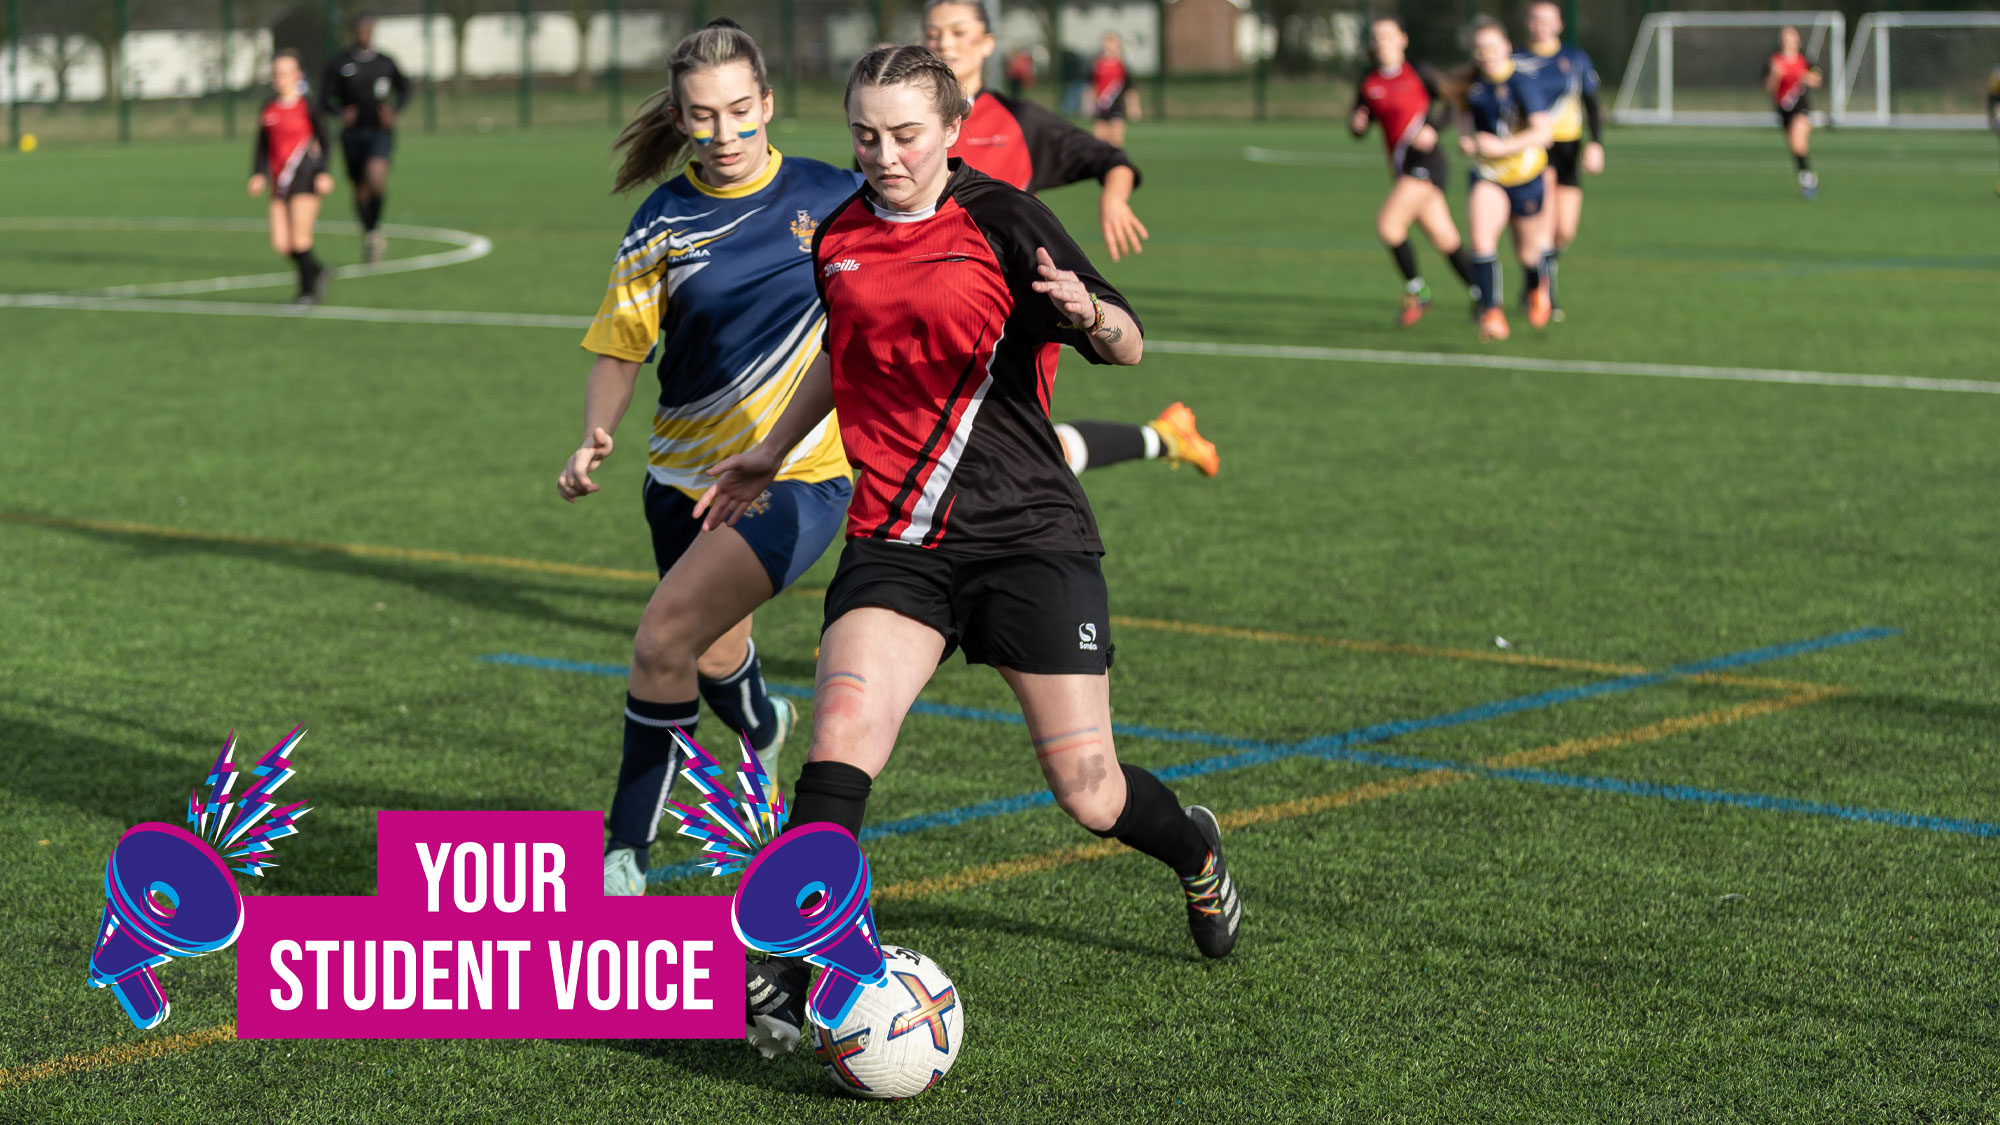 Your Student Voice: Sport and Active Lifestyle